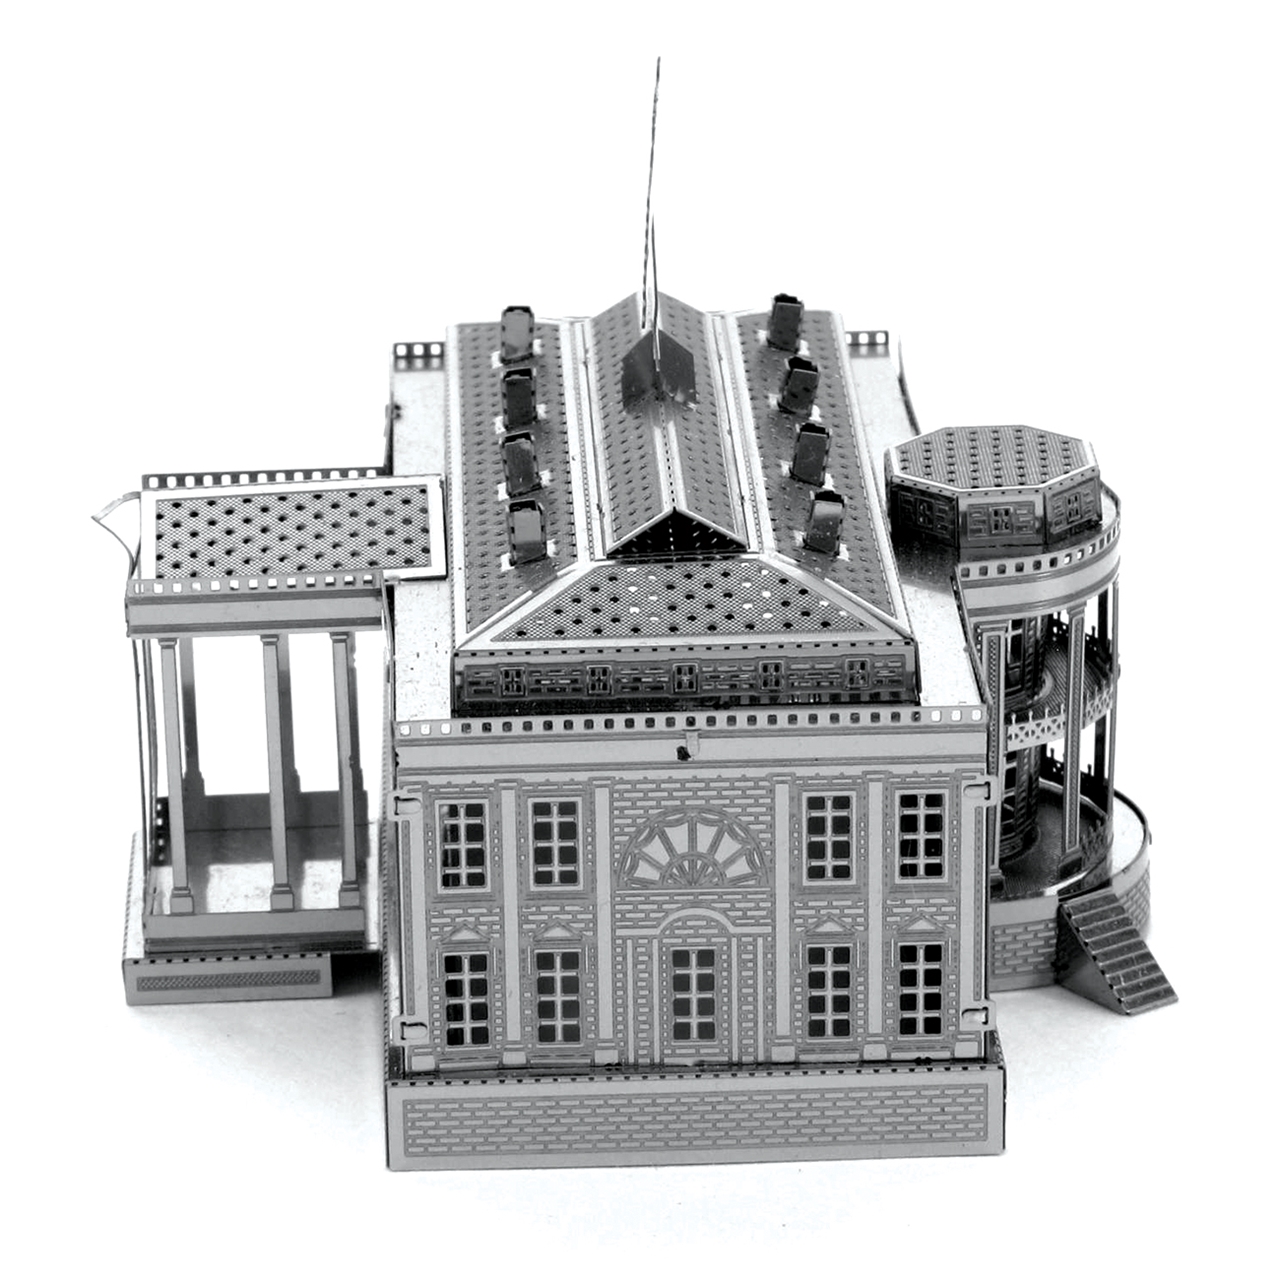 Set of 4 Metal Earth 3D Laser Cut Building Models: Kennedy Center White House United States Capitol Washington Monument 